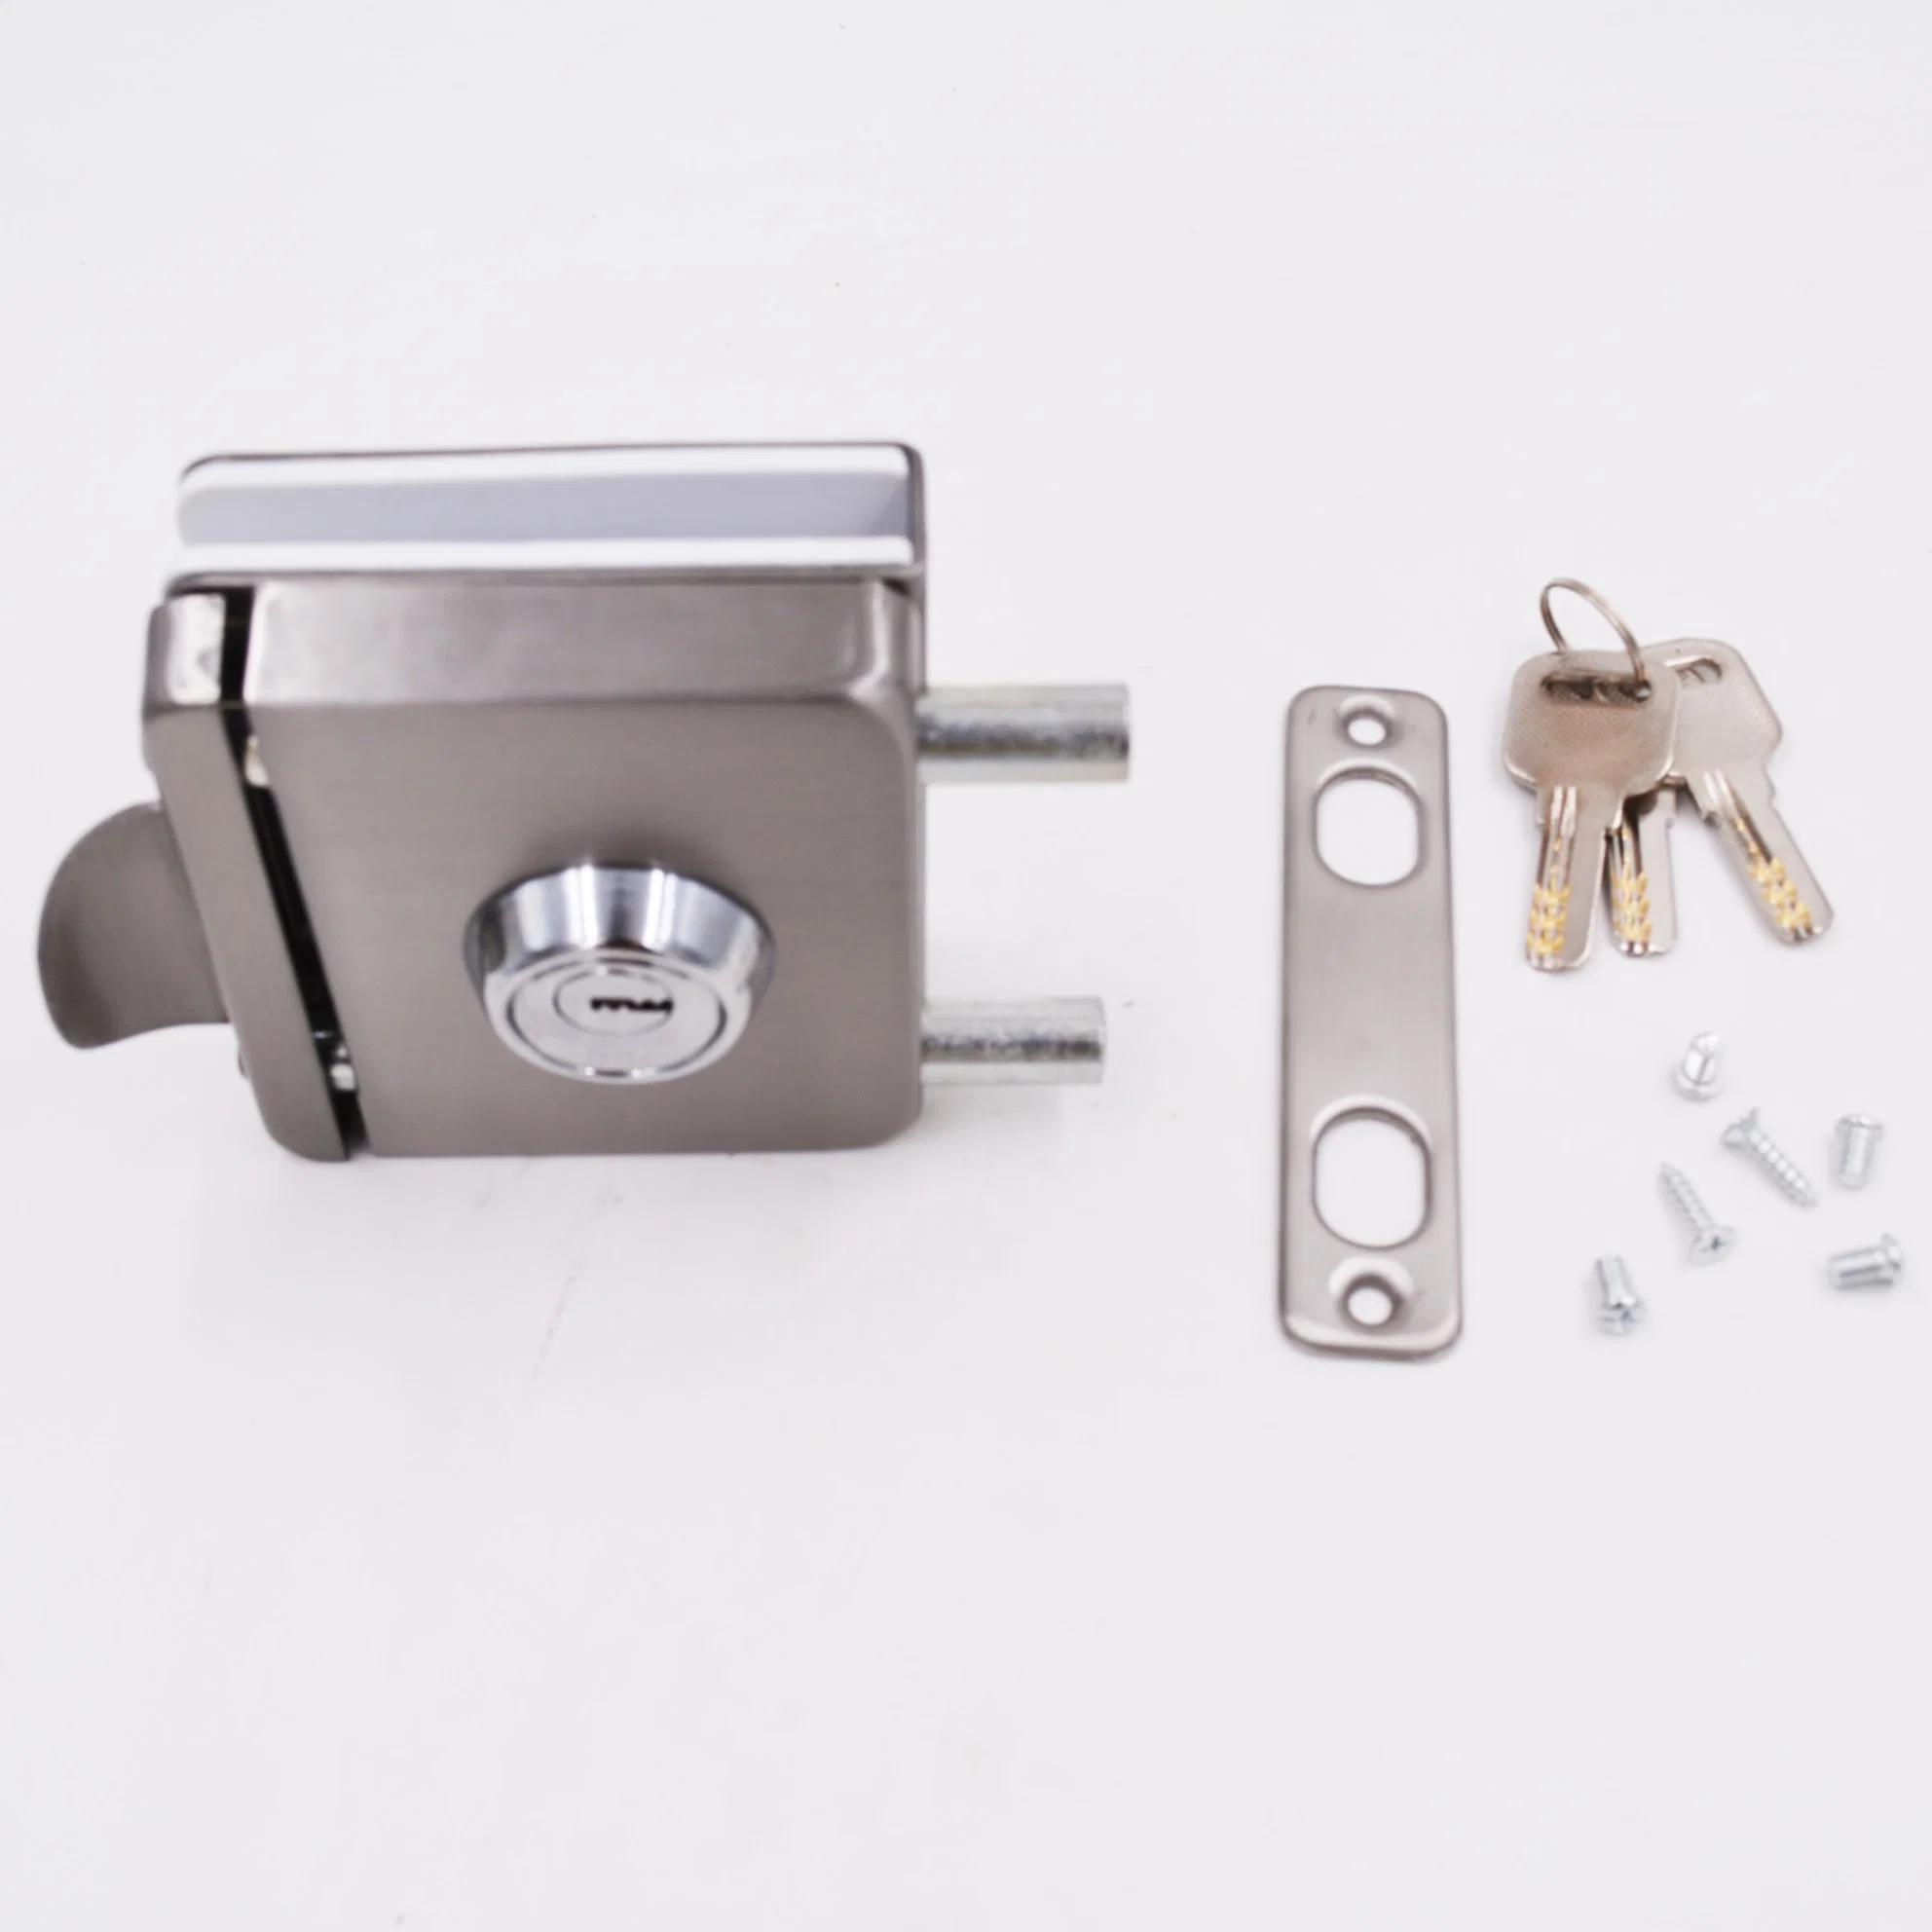 Keyi Metal Kg-14s Glass Door Lock for Single Side Glass Door with Brass Cylinder and Brass Keys